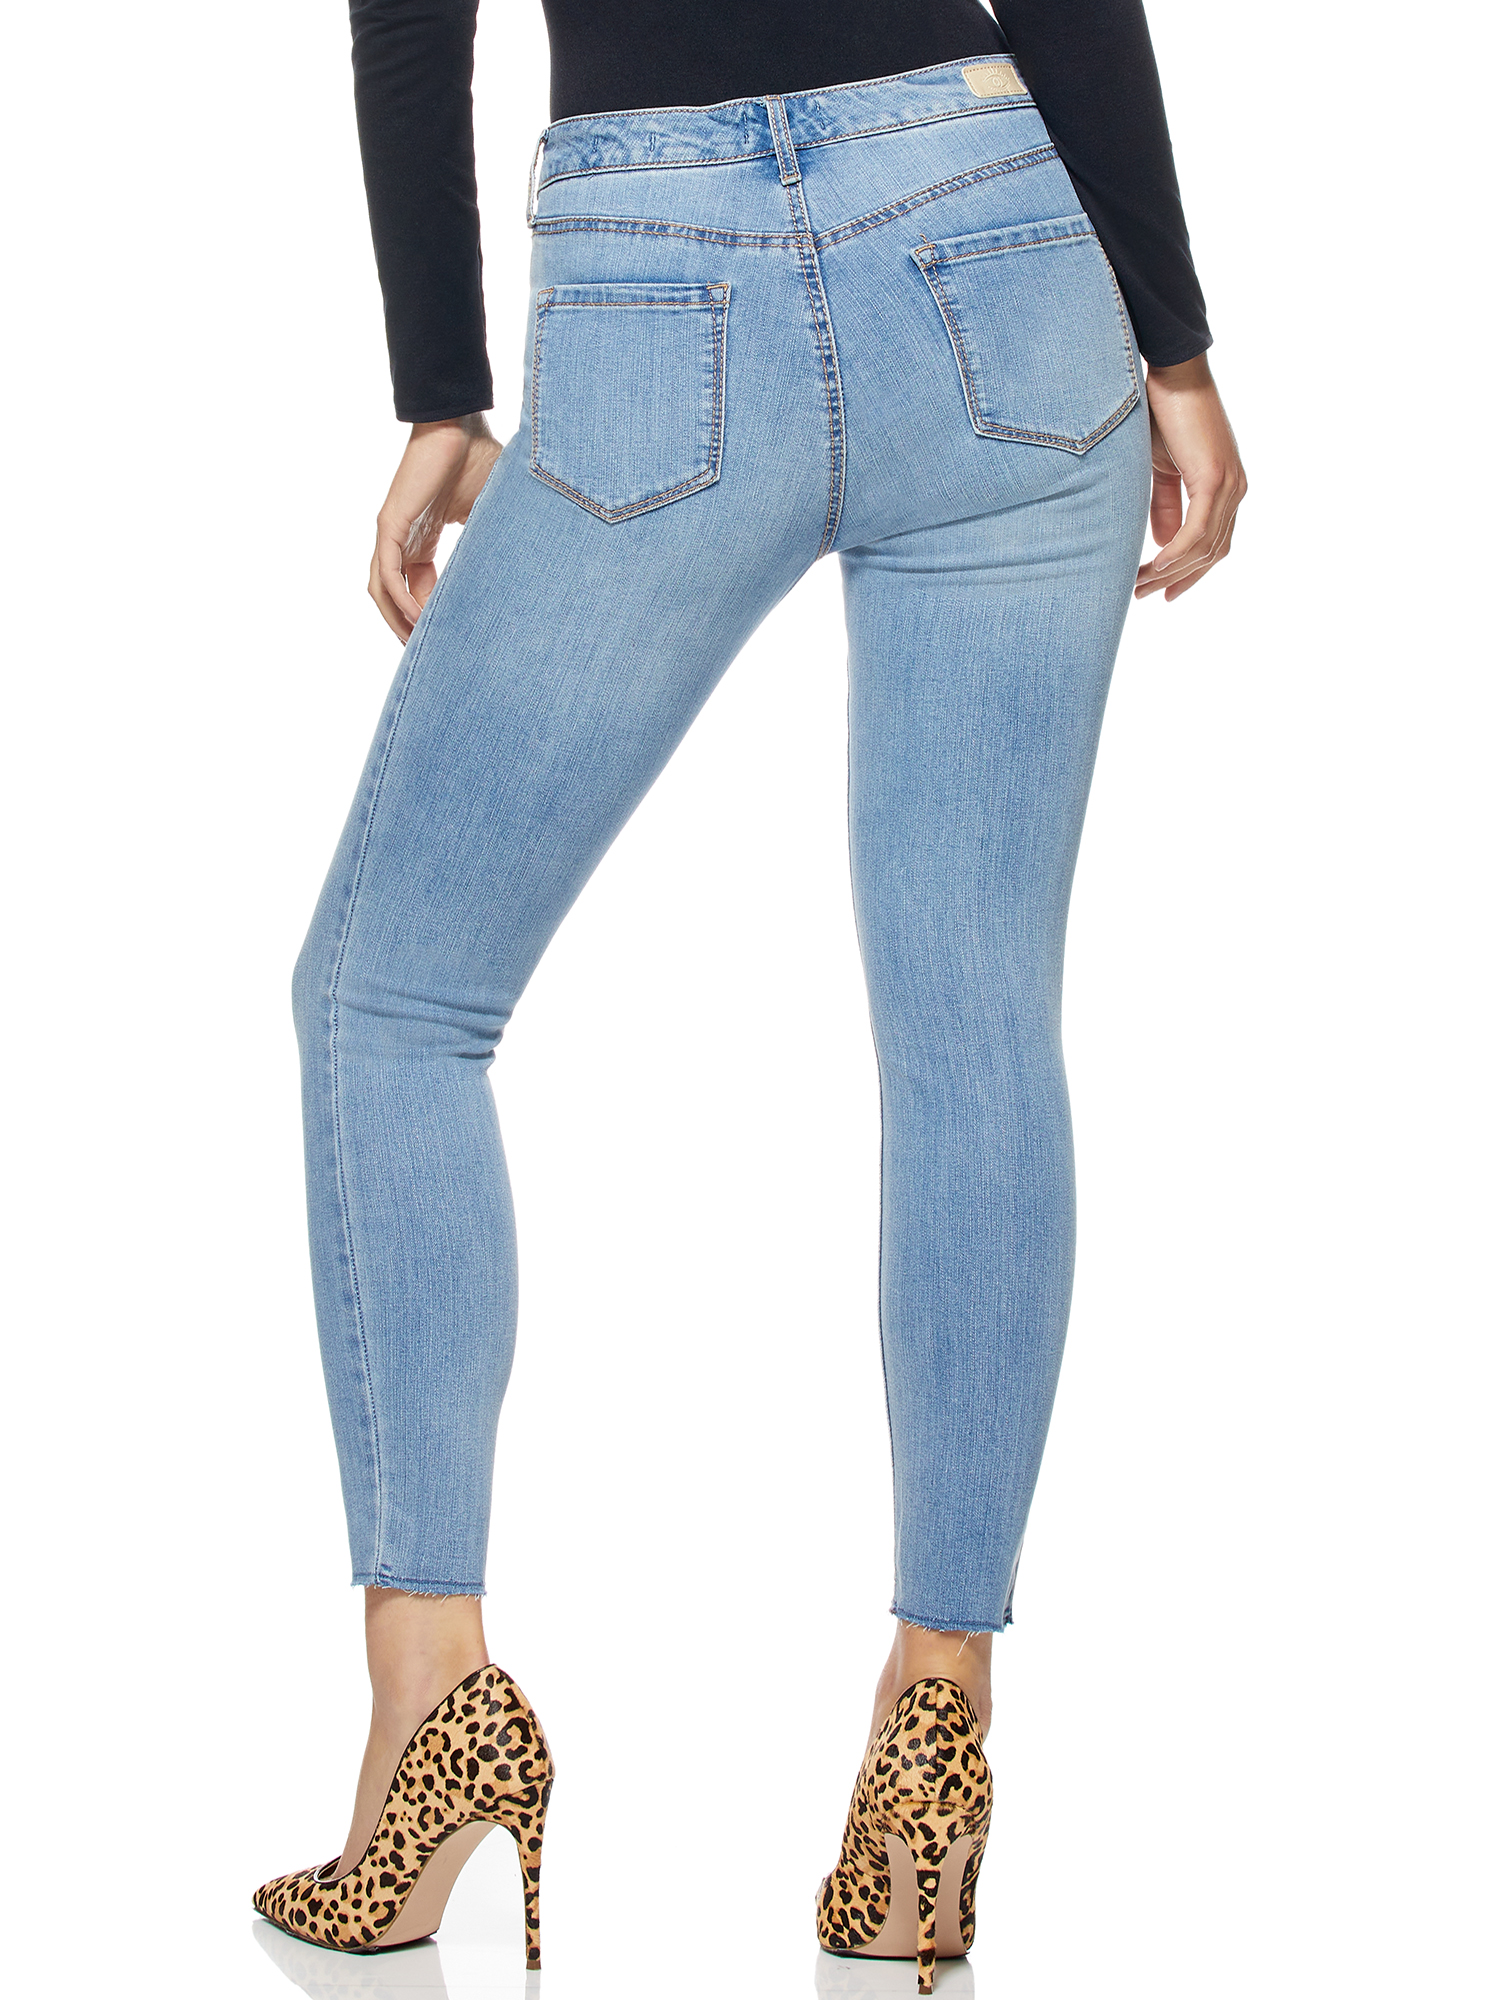 Sofia Jeans Women's Sofia Skinny Mid Rise Ankle Jeans - image 3 of 7